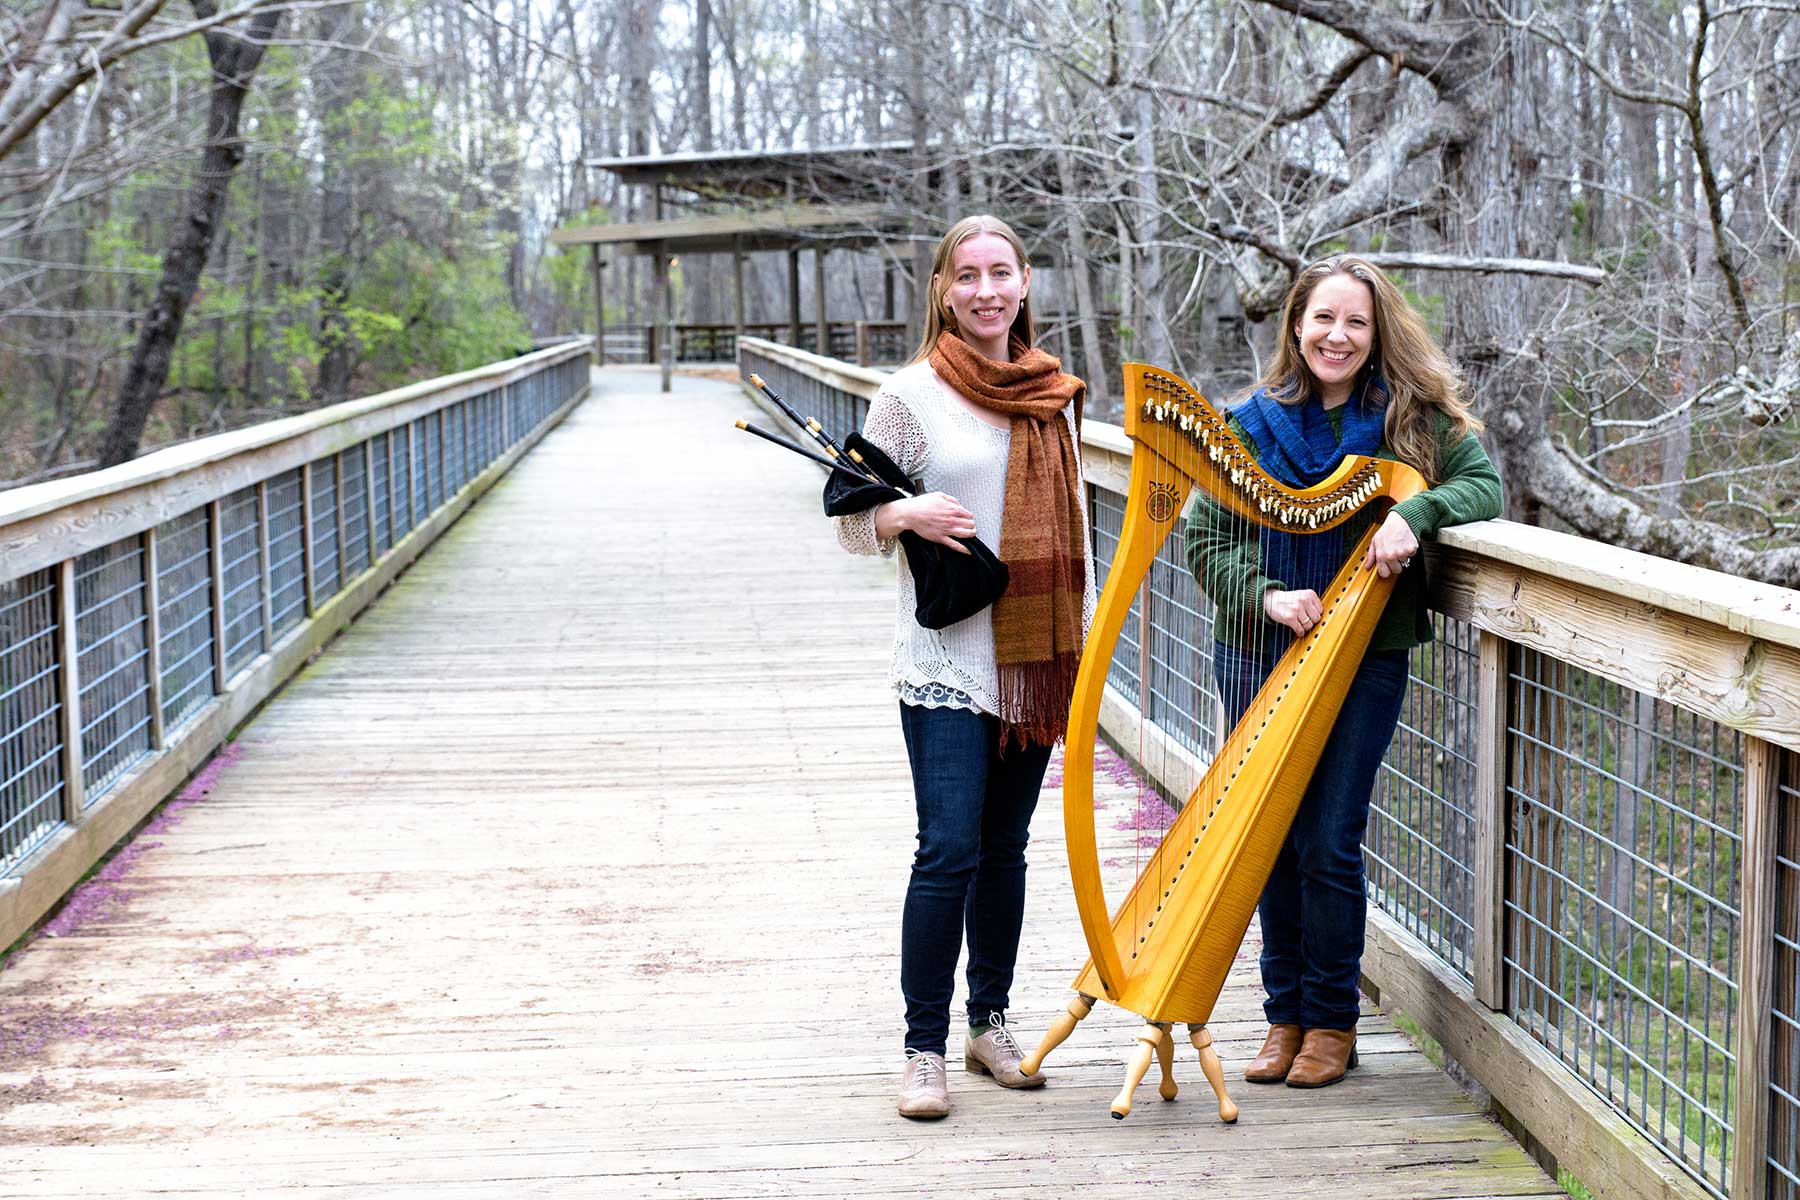 Rosalind holding the Scottish smallpipes and Kelly with her harp on a bridge.